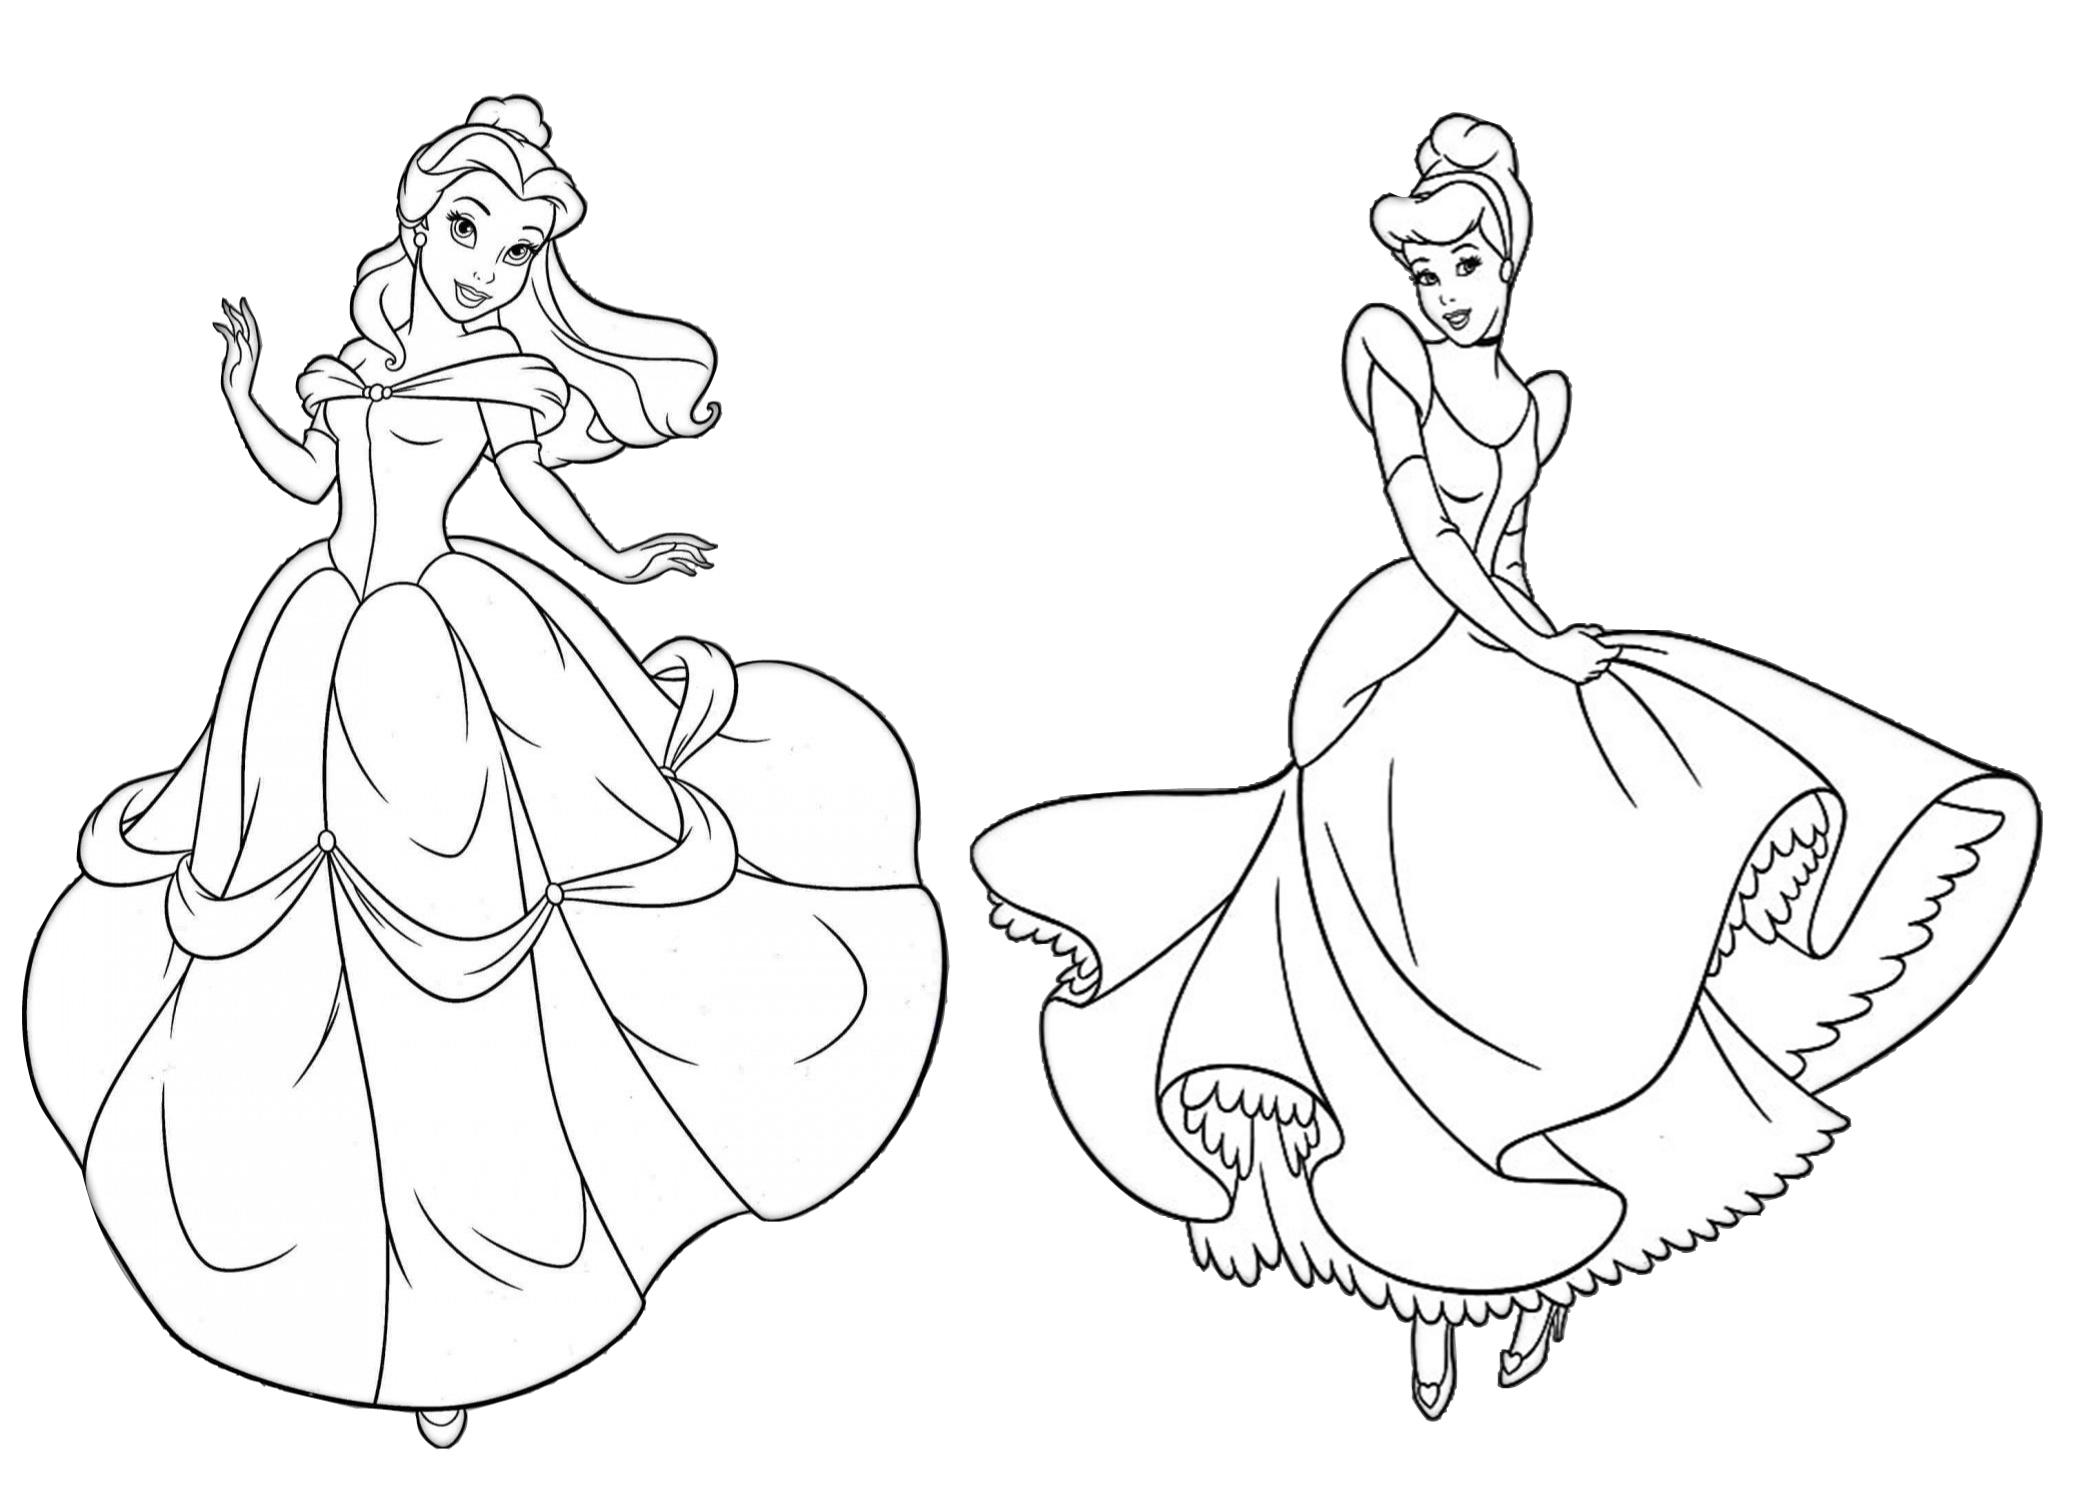 Disney princess coloring pages for girls